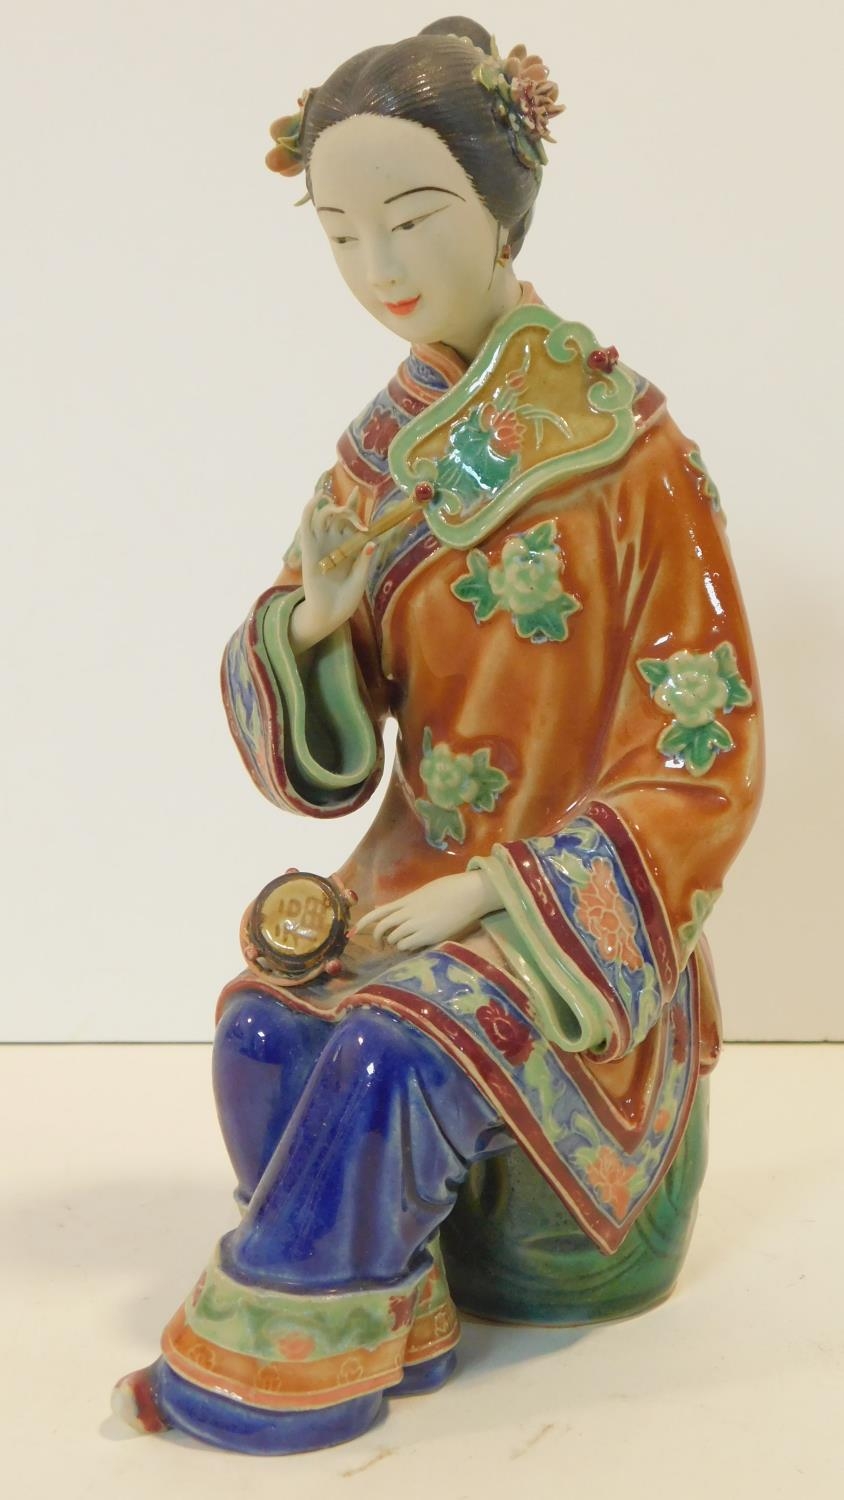 A Japanese ceramic figure of a lady sitting on a garden seat in polychrome hand painted decoration